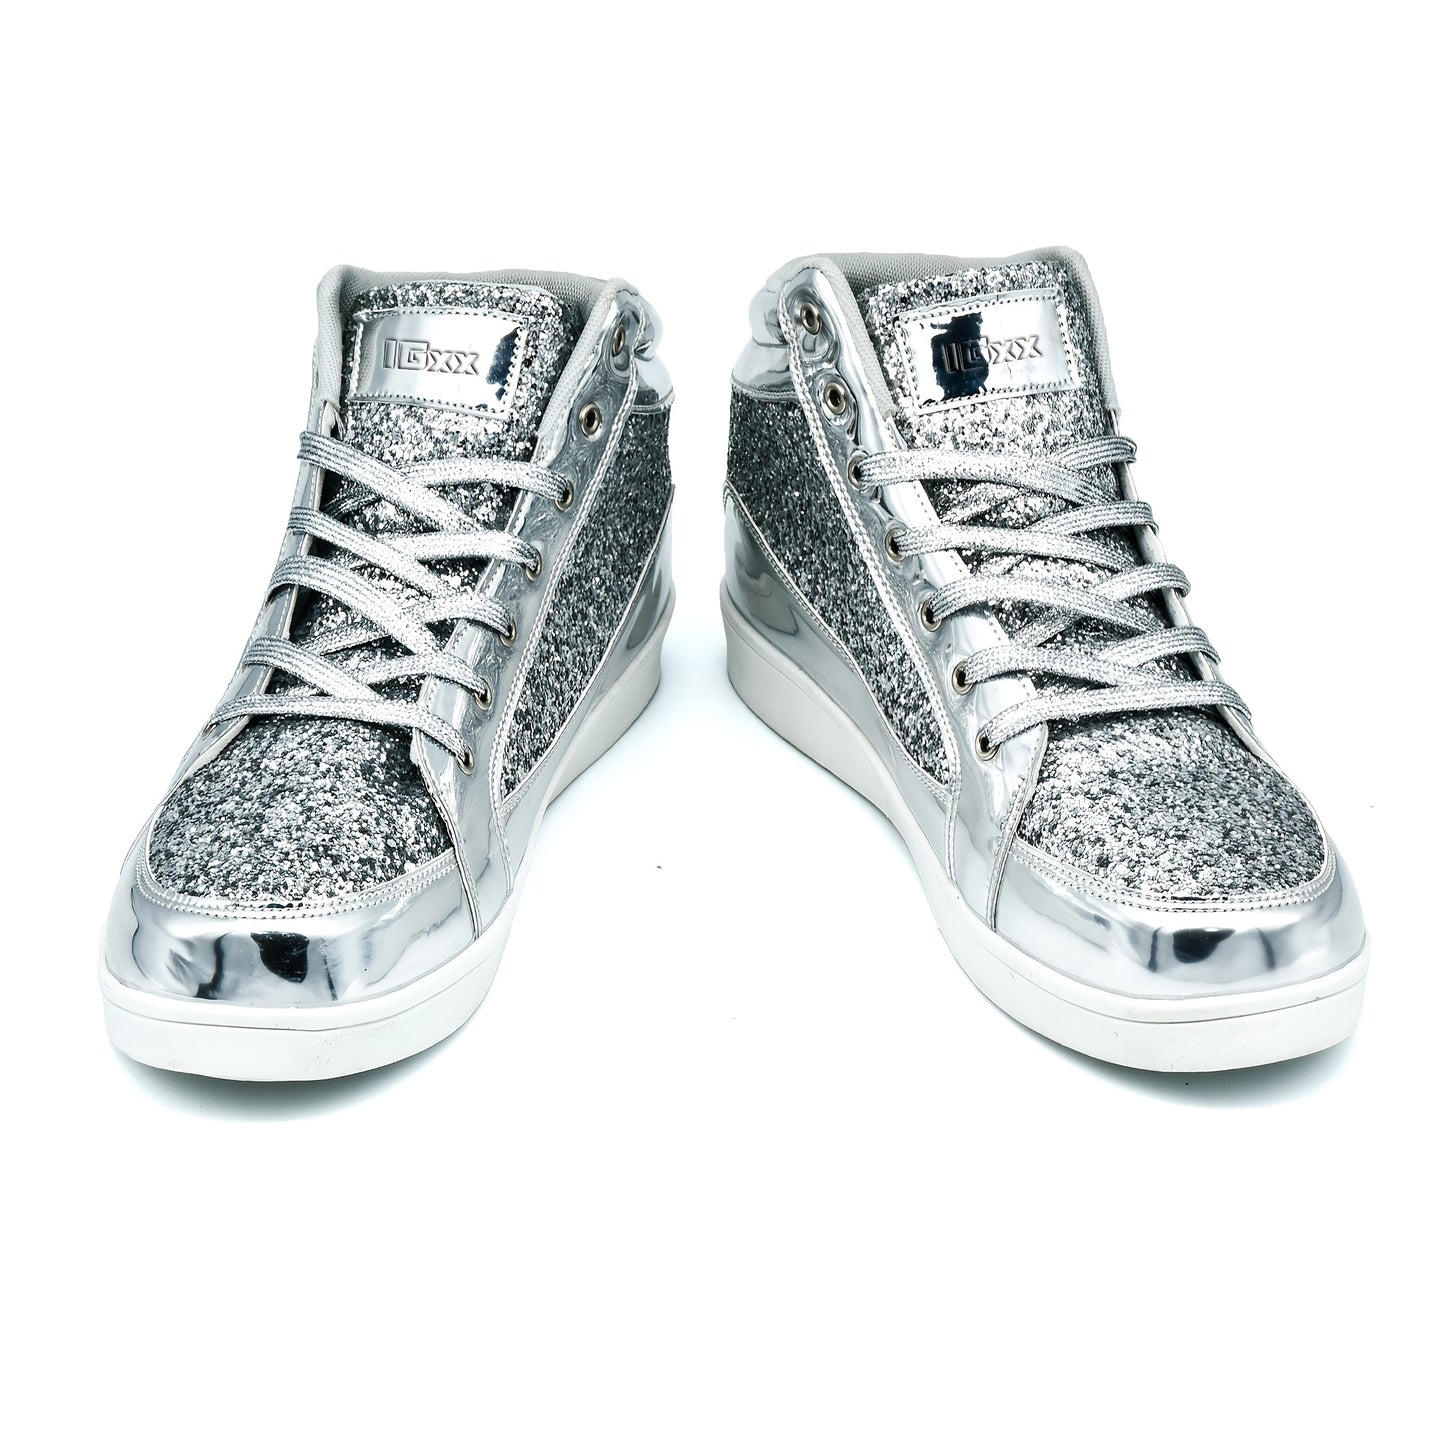 High Top Sequin Shoes, Shiny Casual Sneakers For Parties